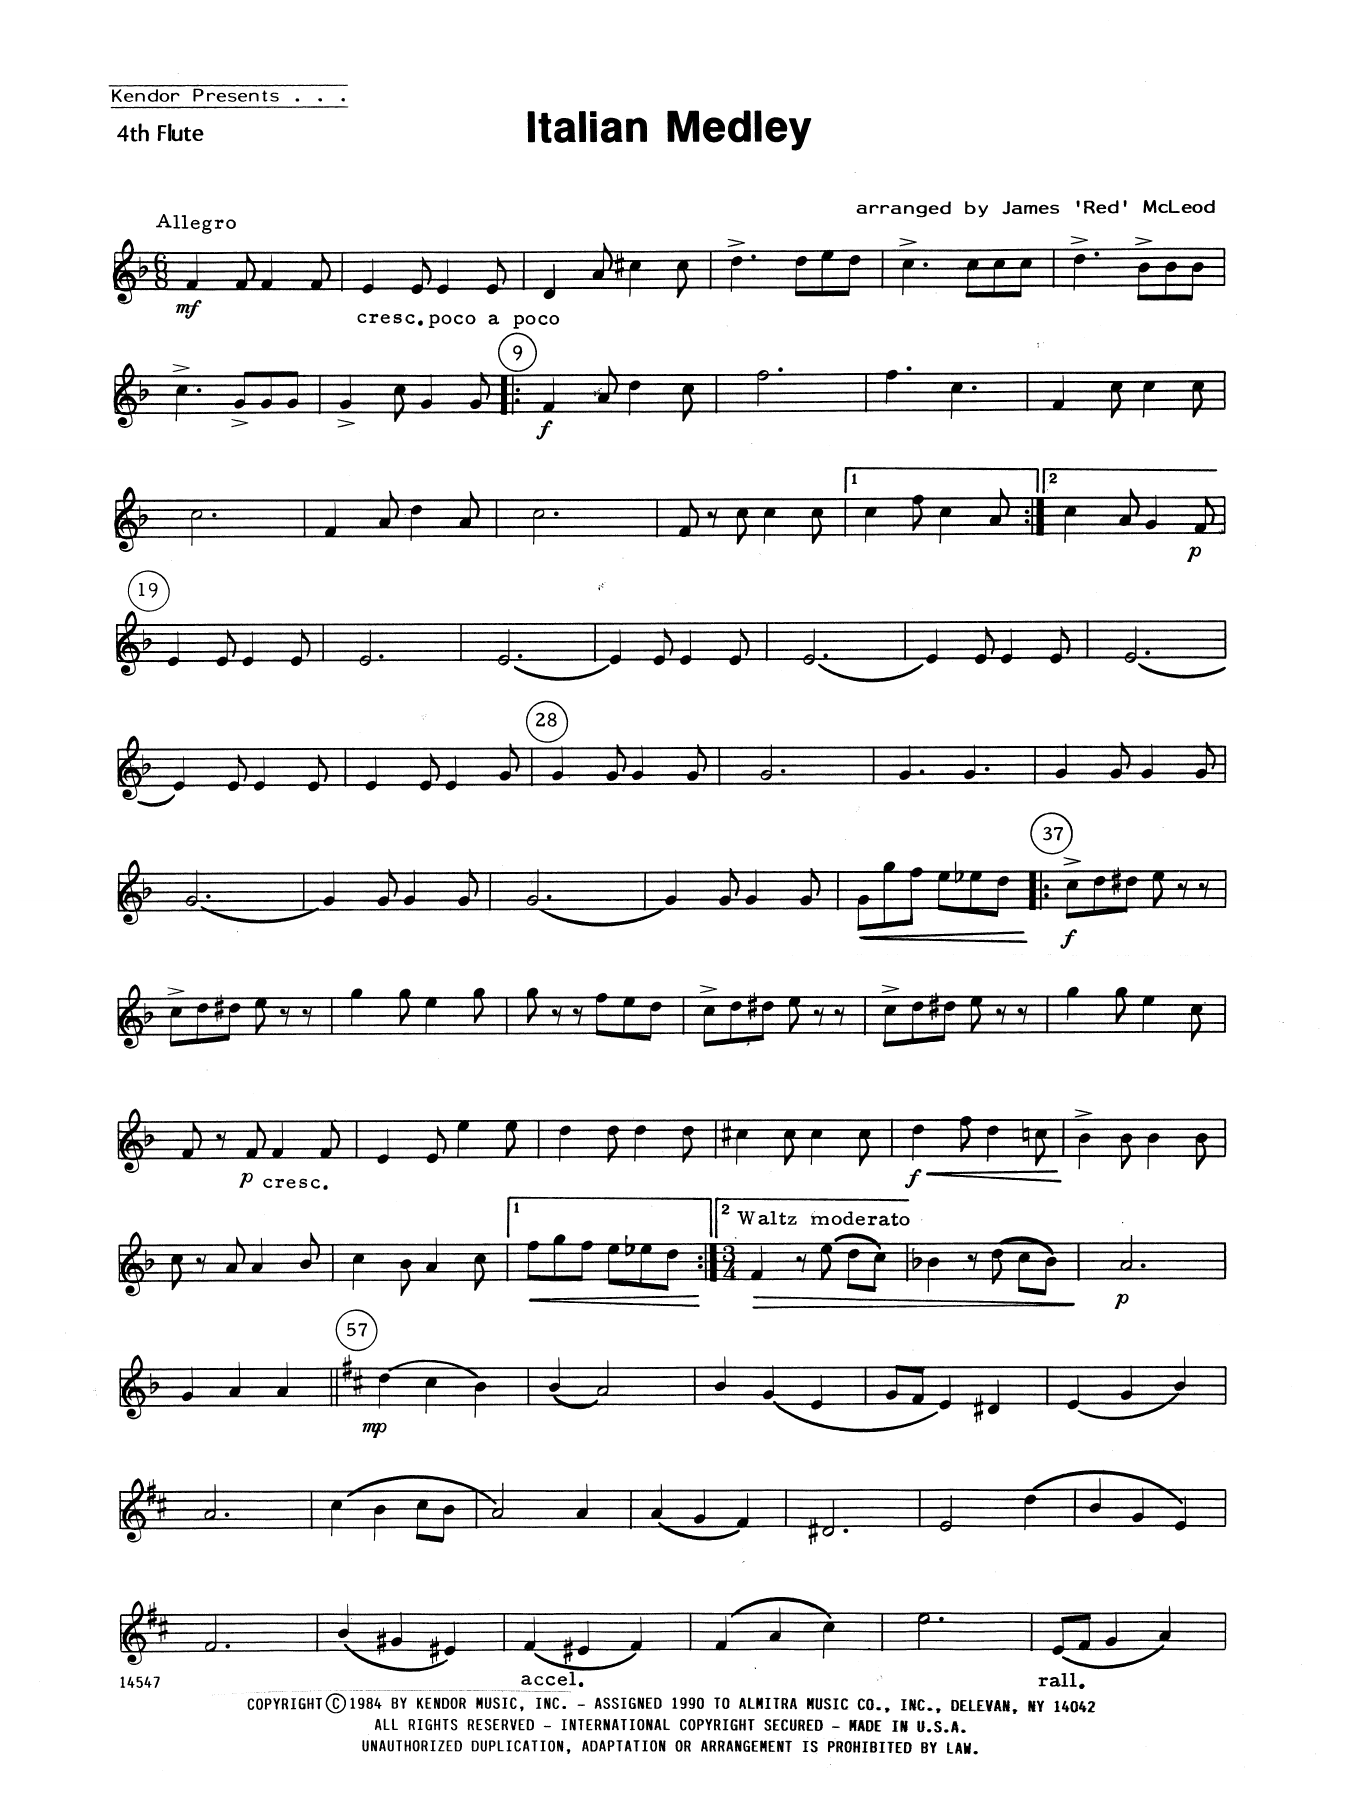 Download James 'Red' McLeod Italian Medley - 4th Flute Sheet Music